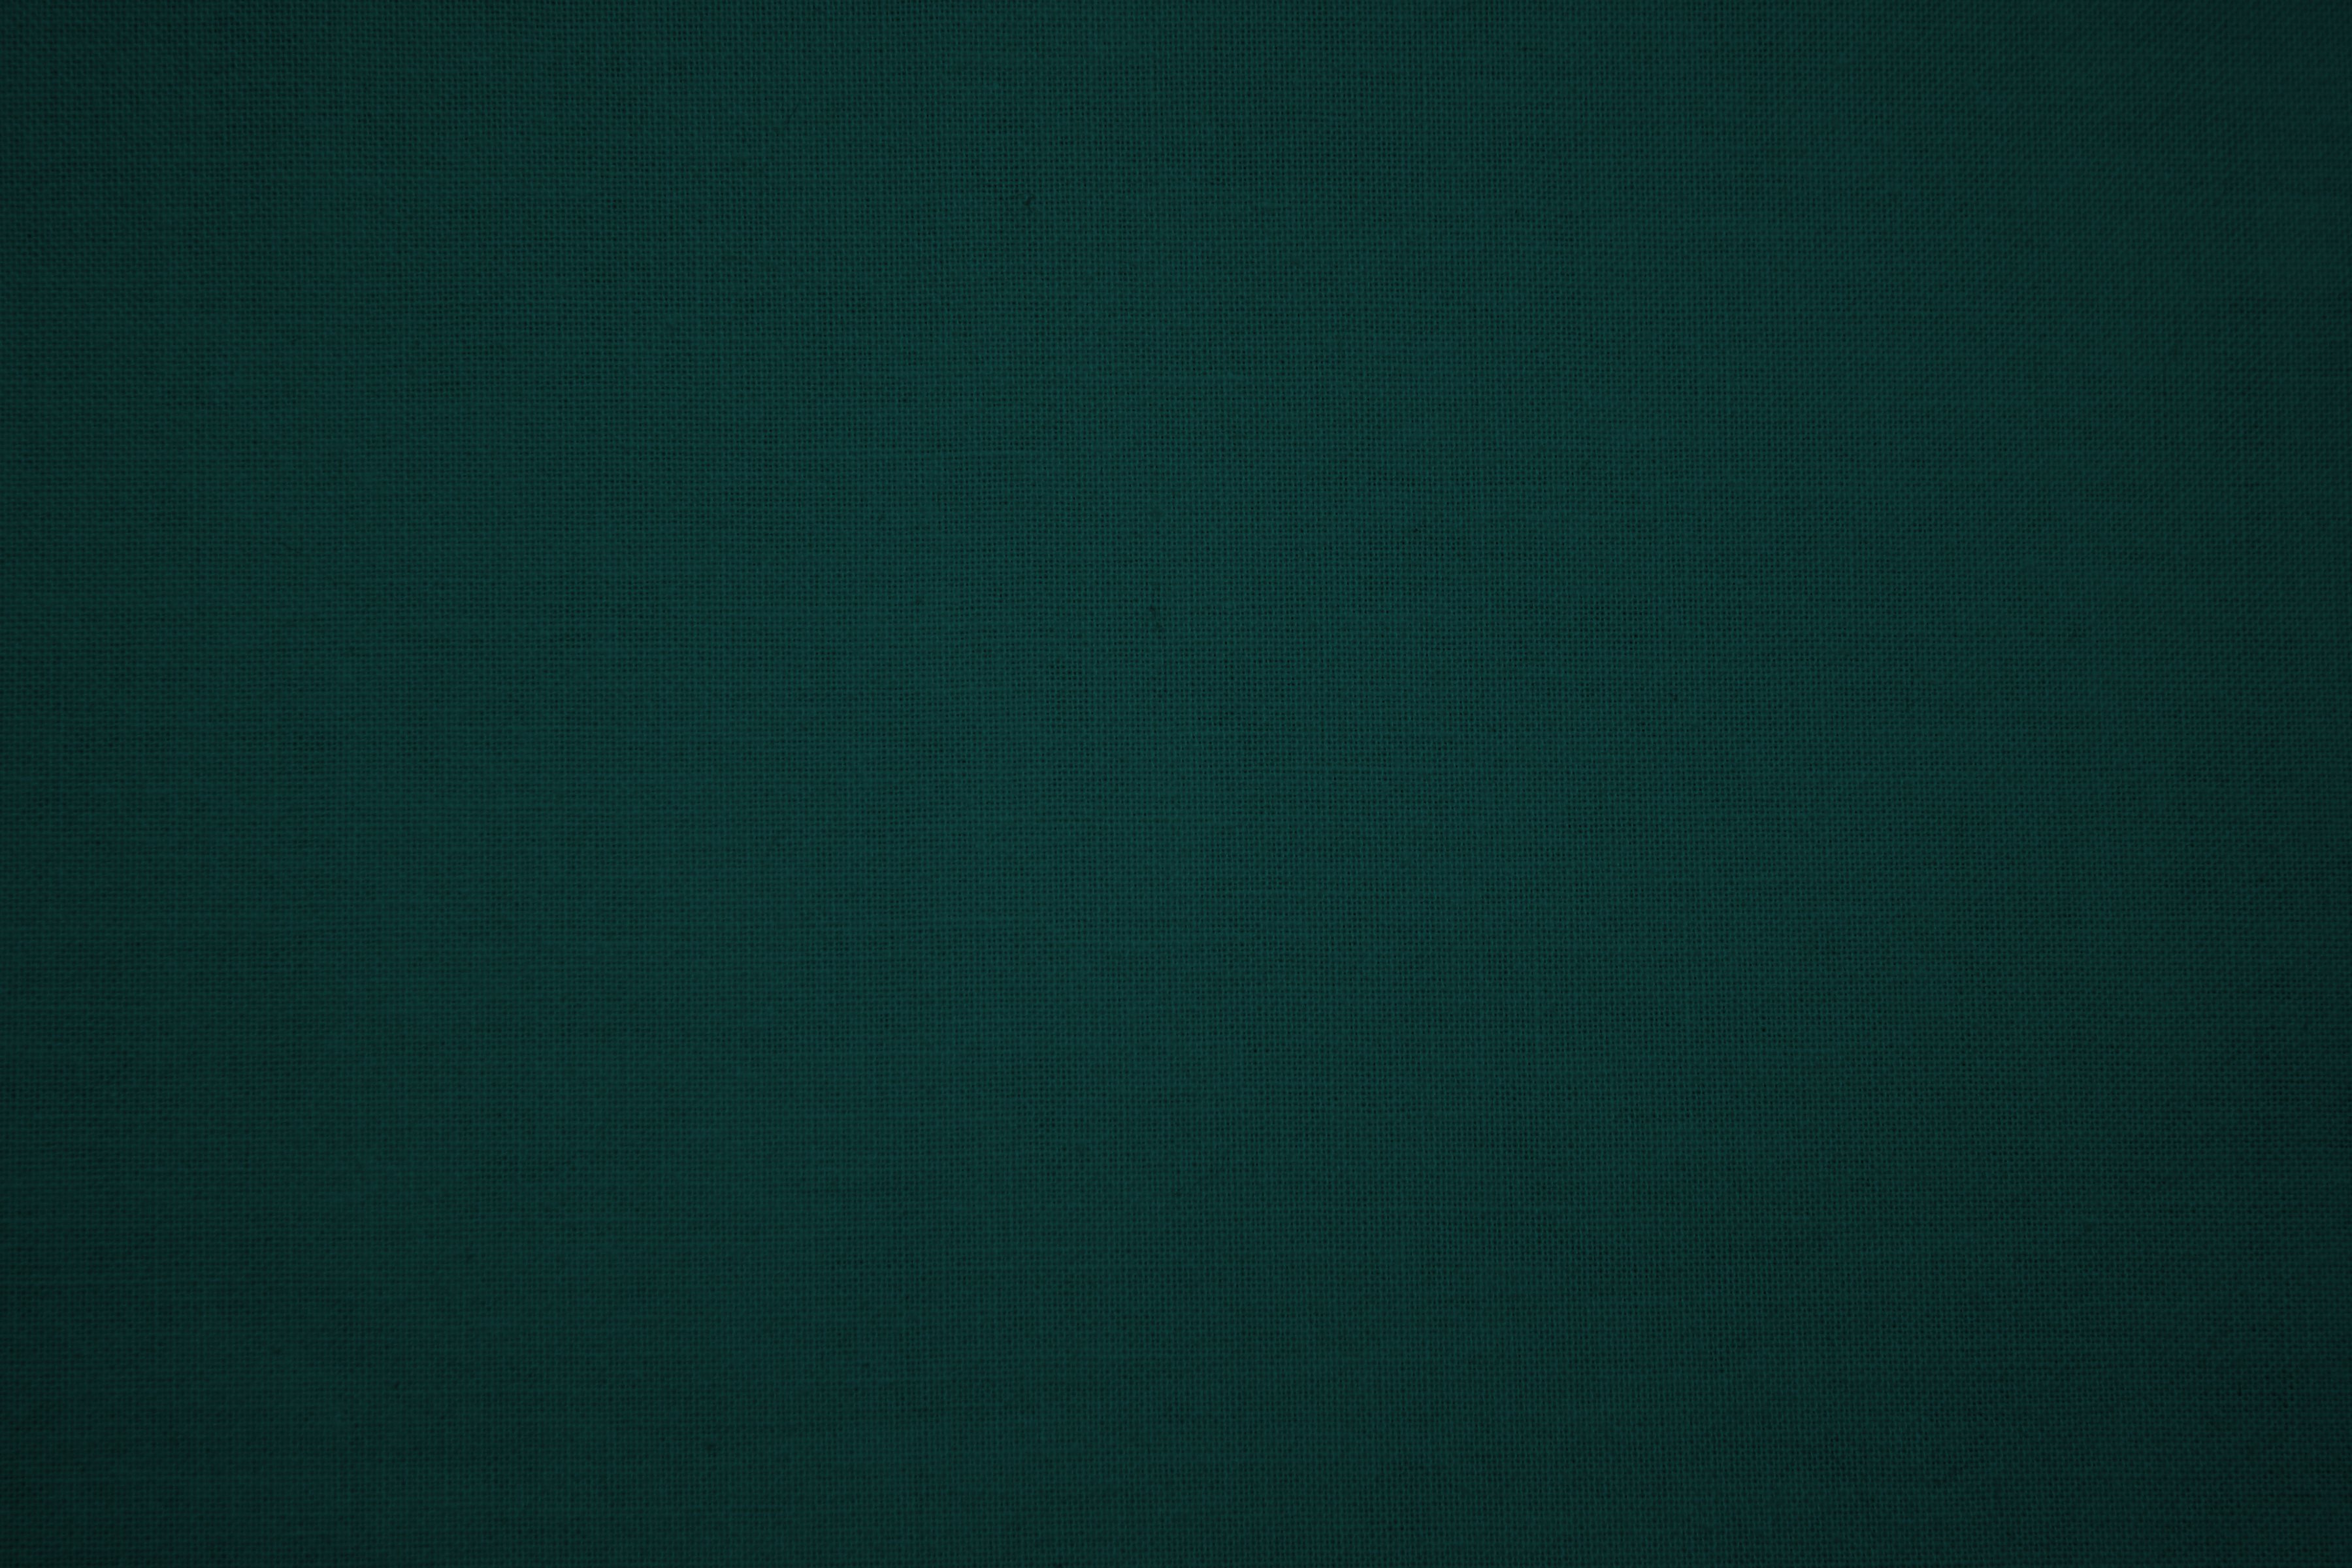 Dark Teal Canvas Fabric Texture Picture | Free Photograph ...